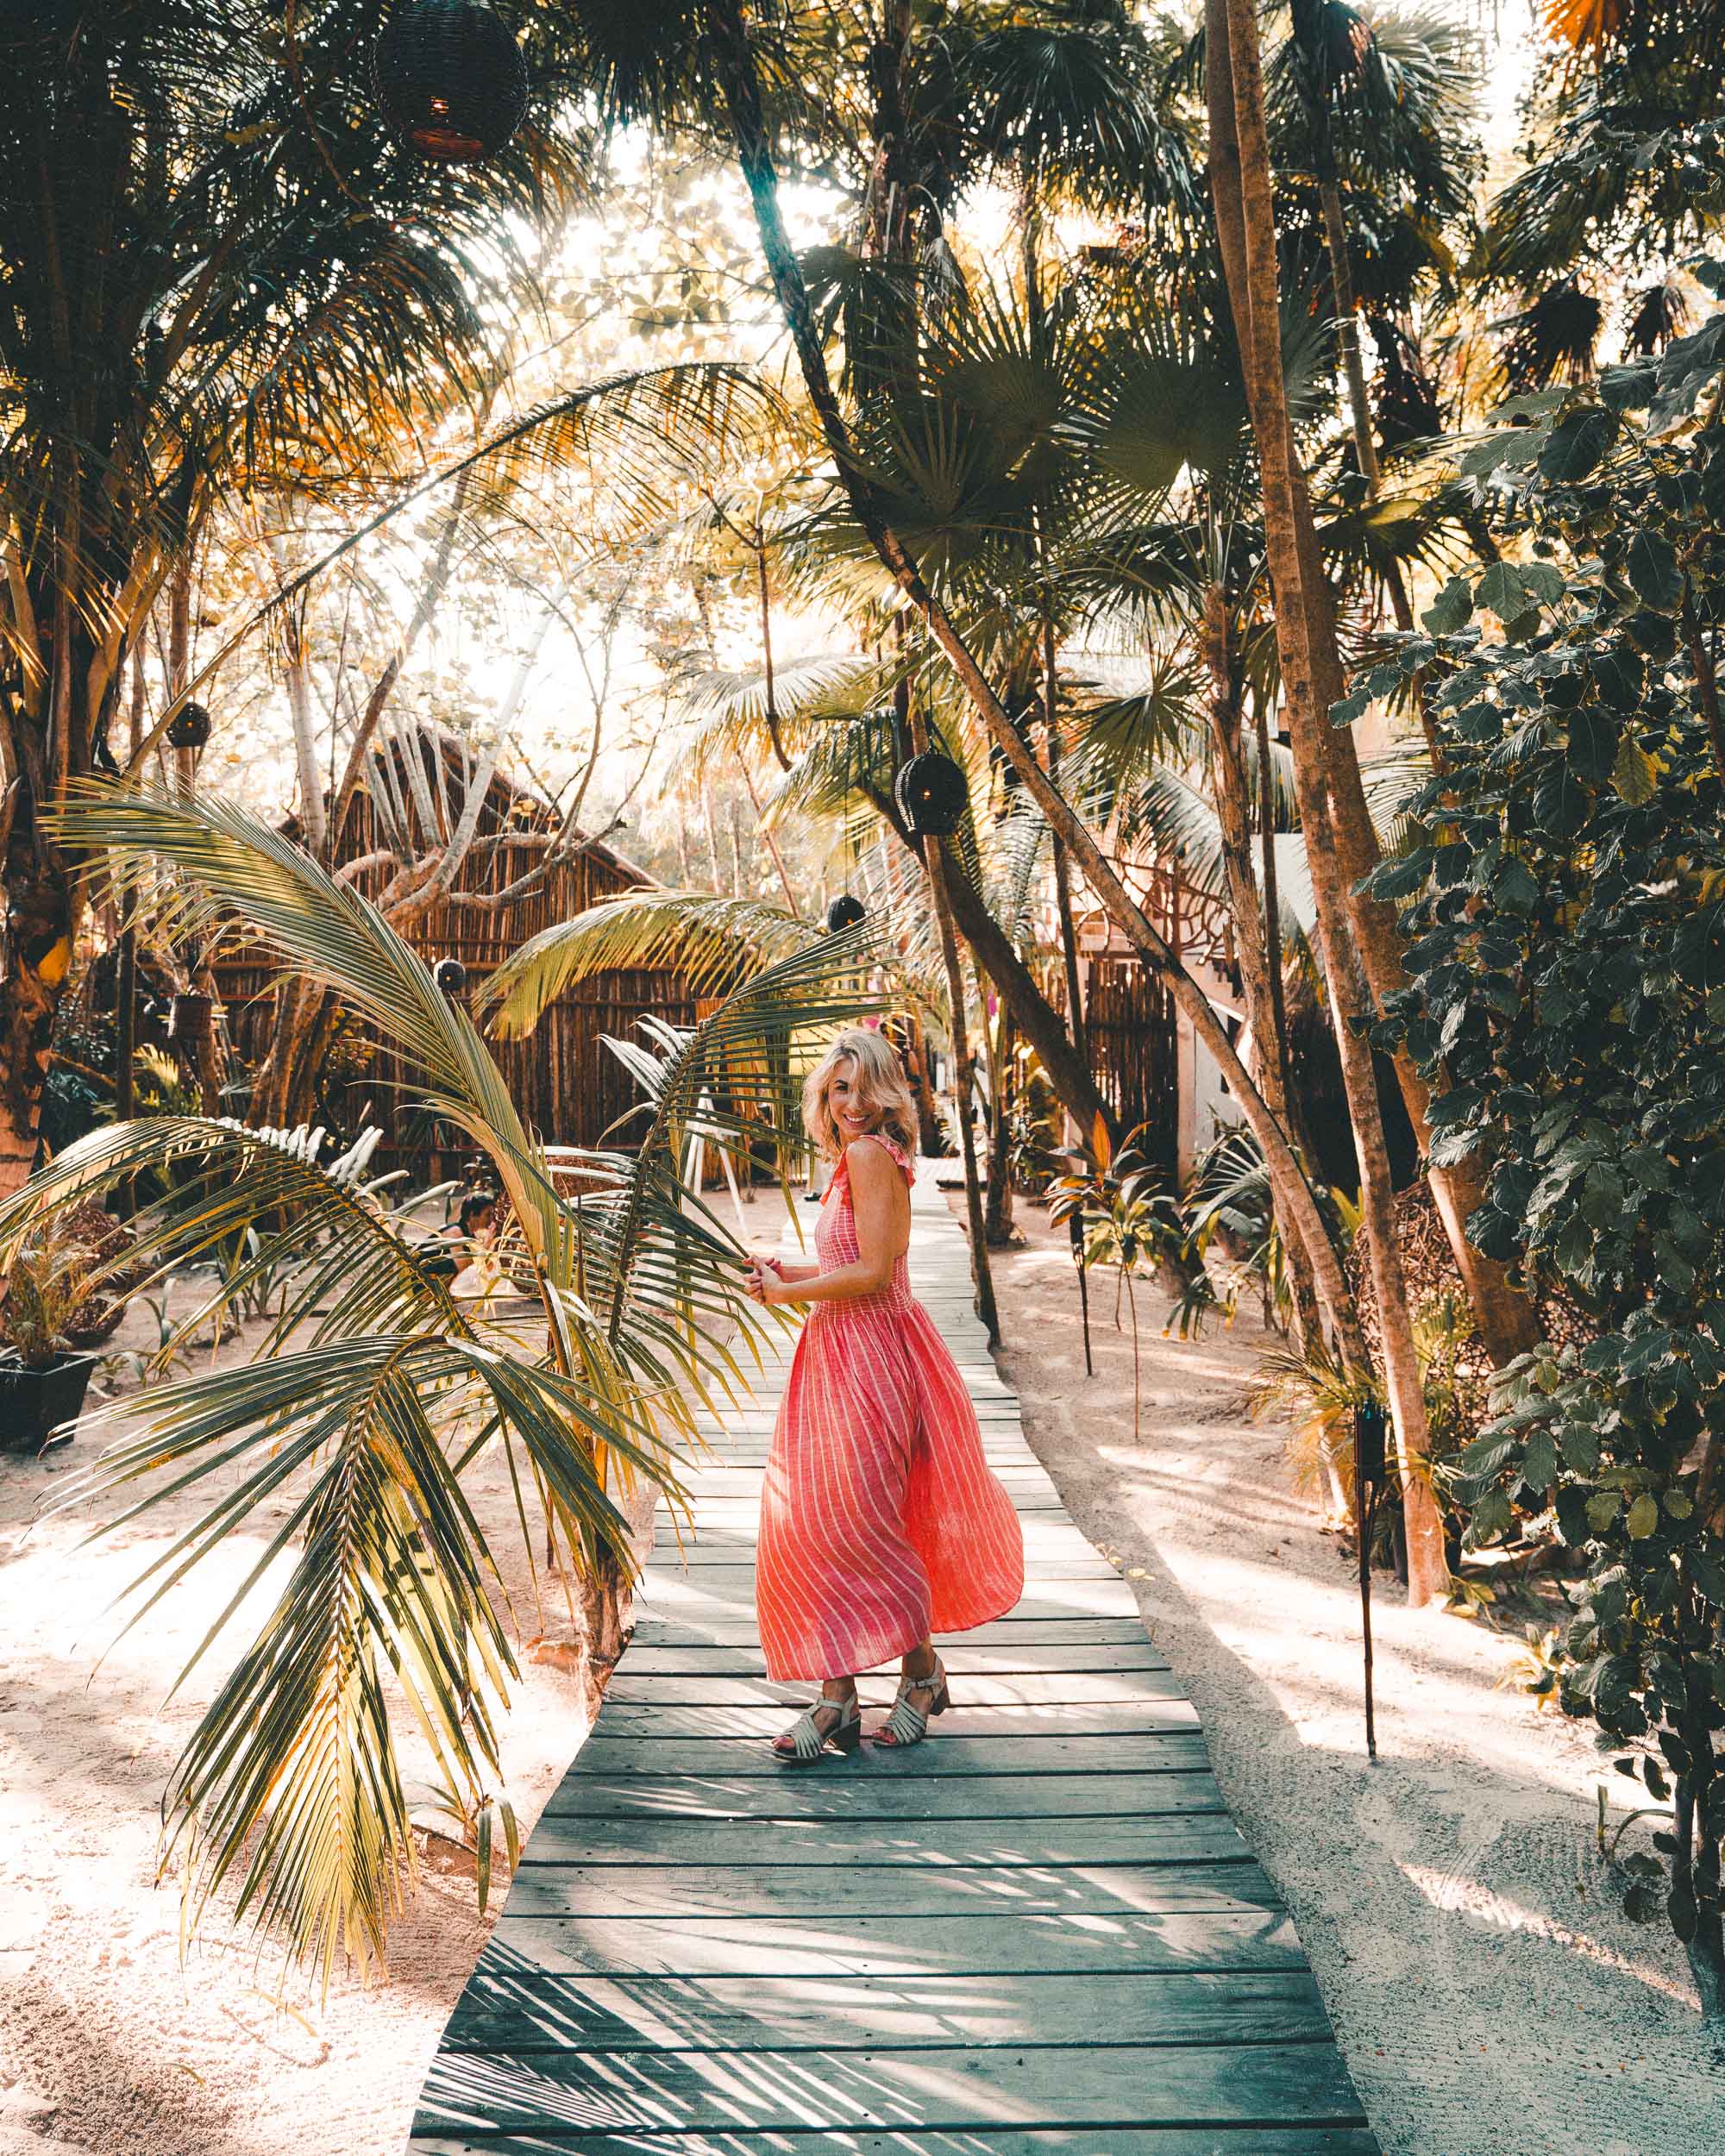 Pink dress in Tulum Mexico via Find Us Lost